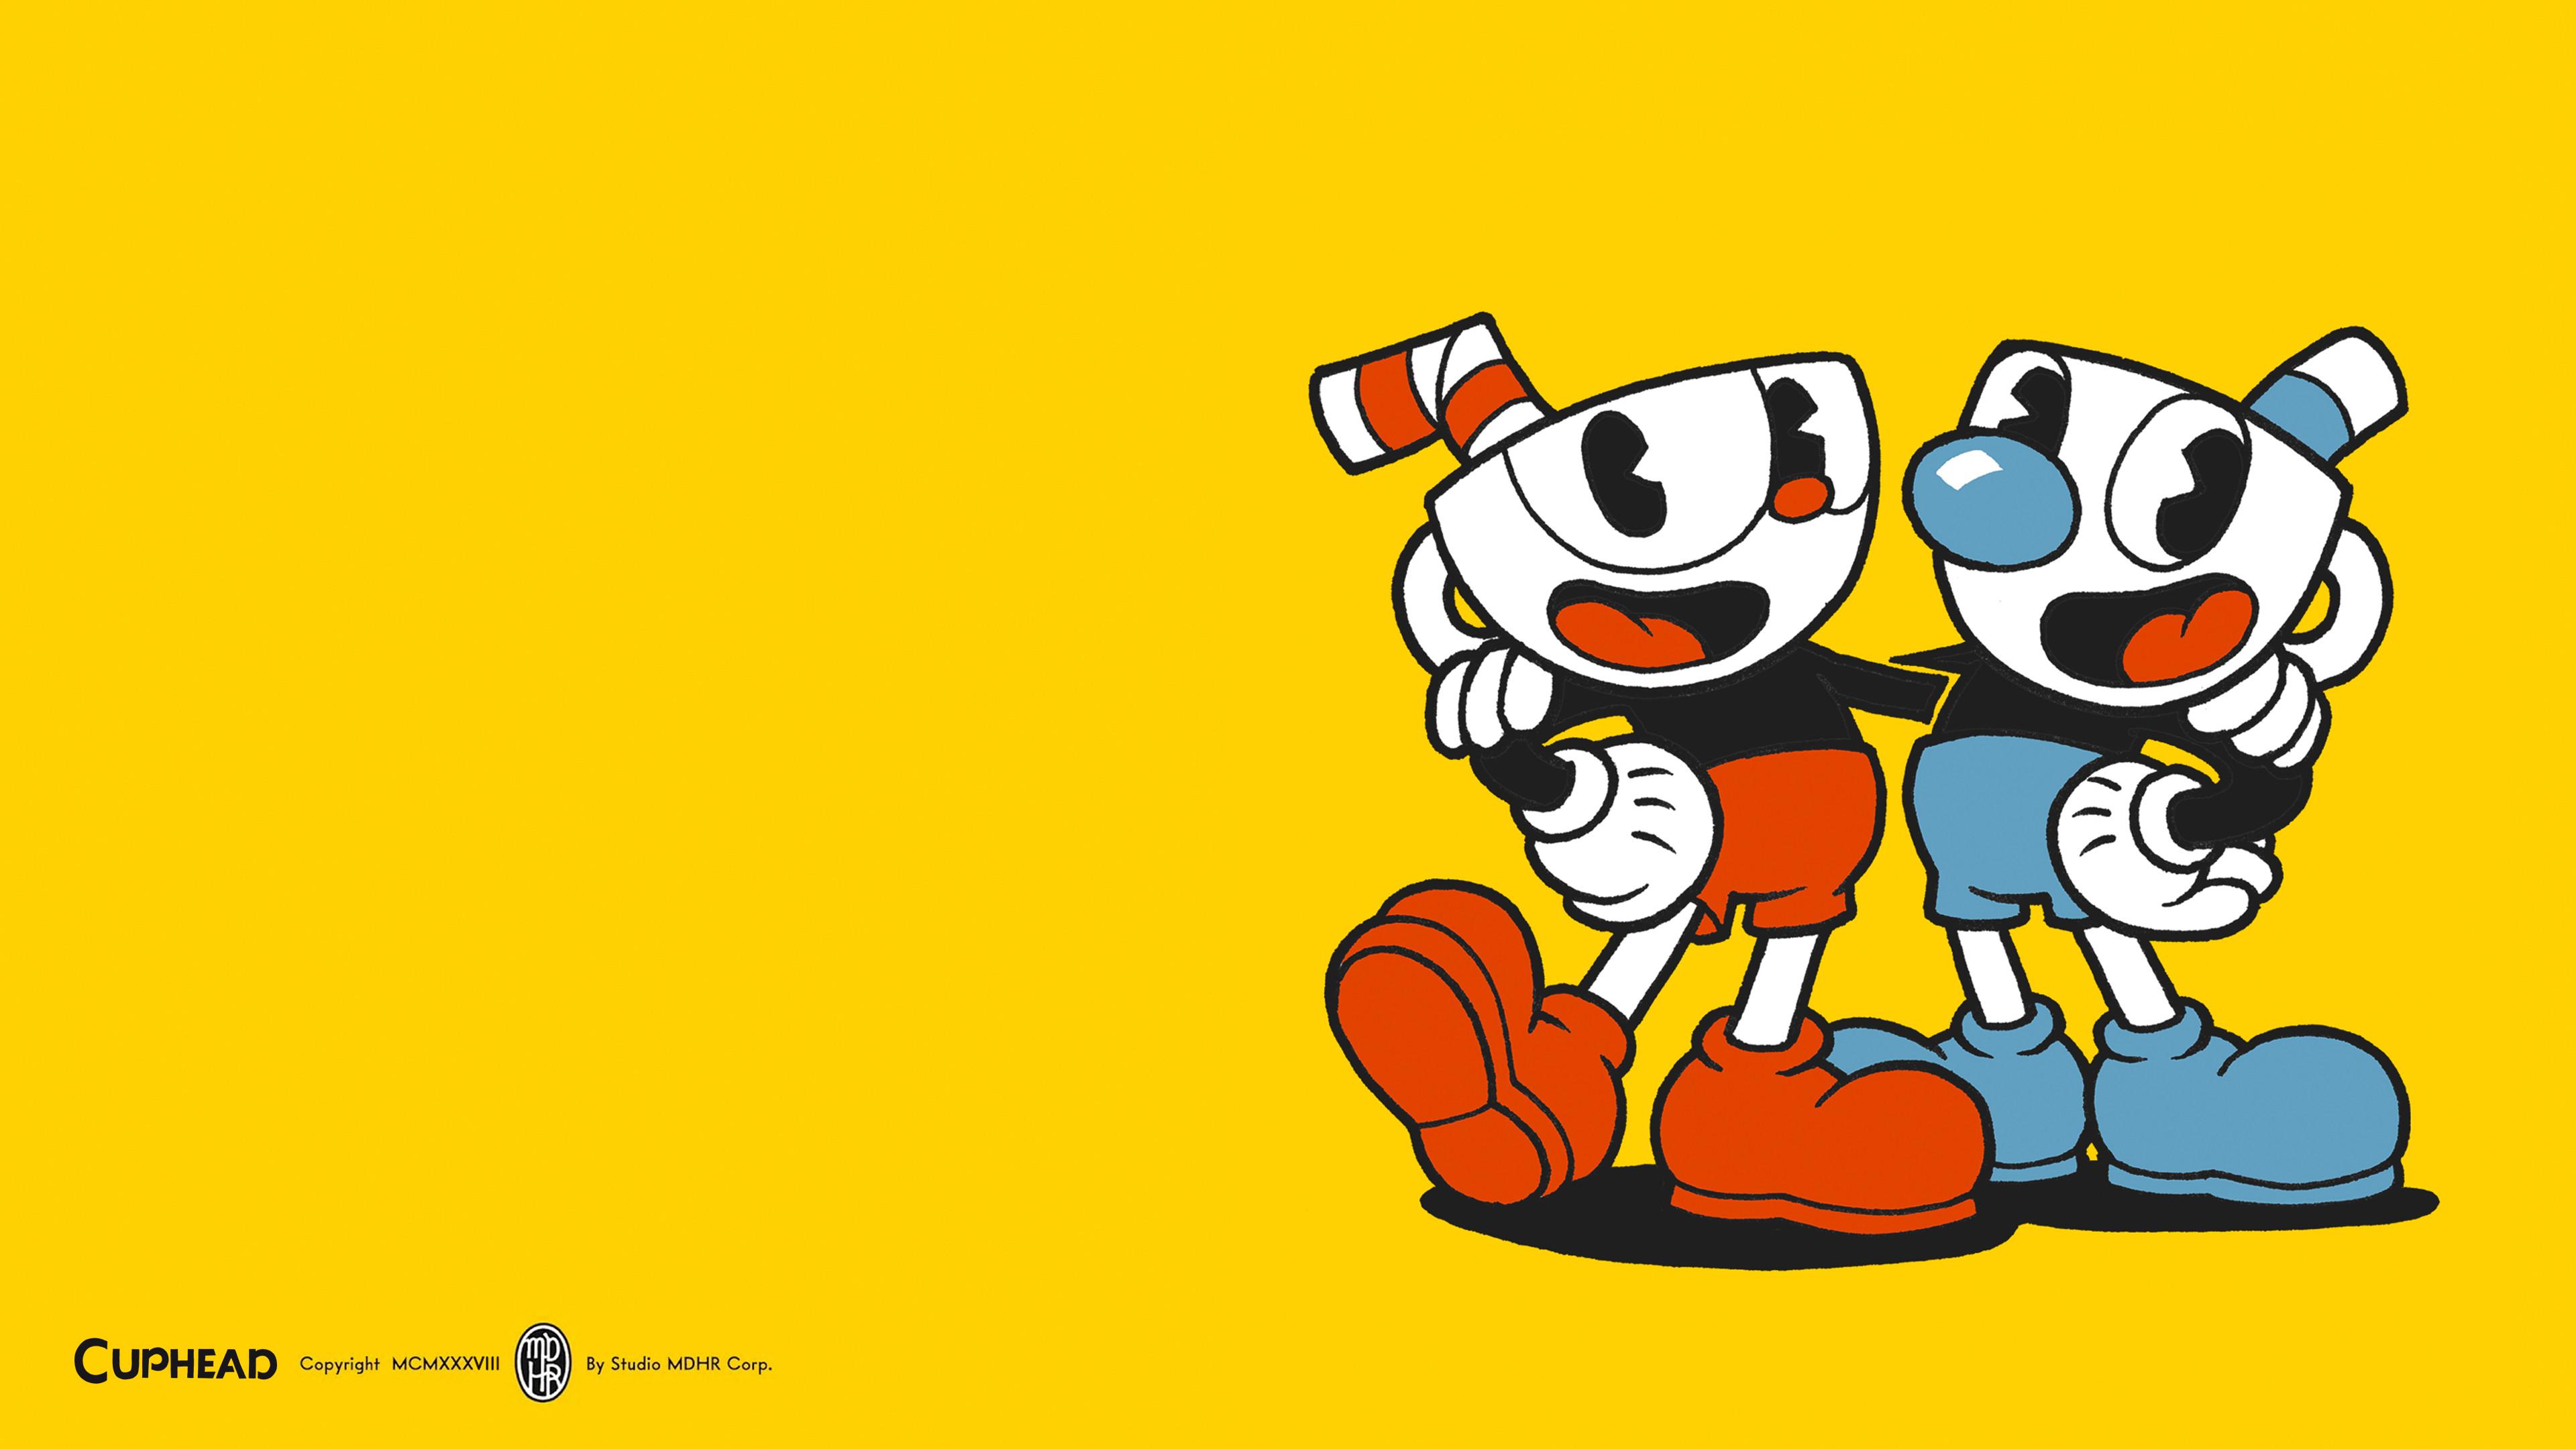 30 The Cuphead Show HD Wallpapers and Backgrounds